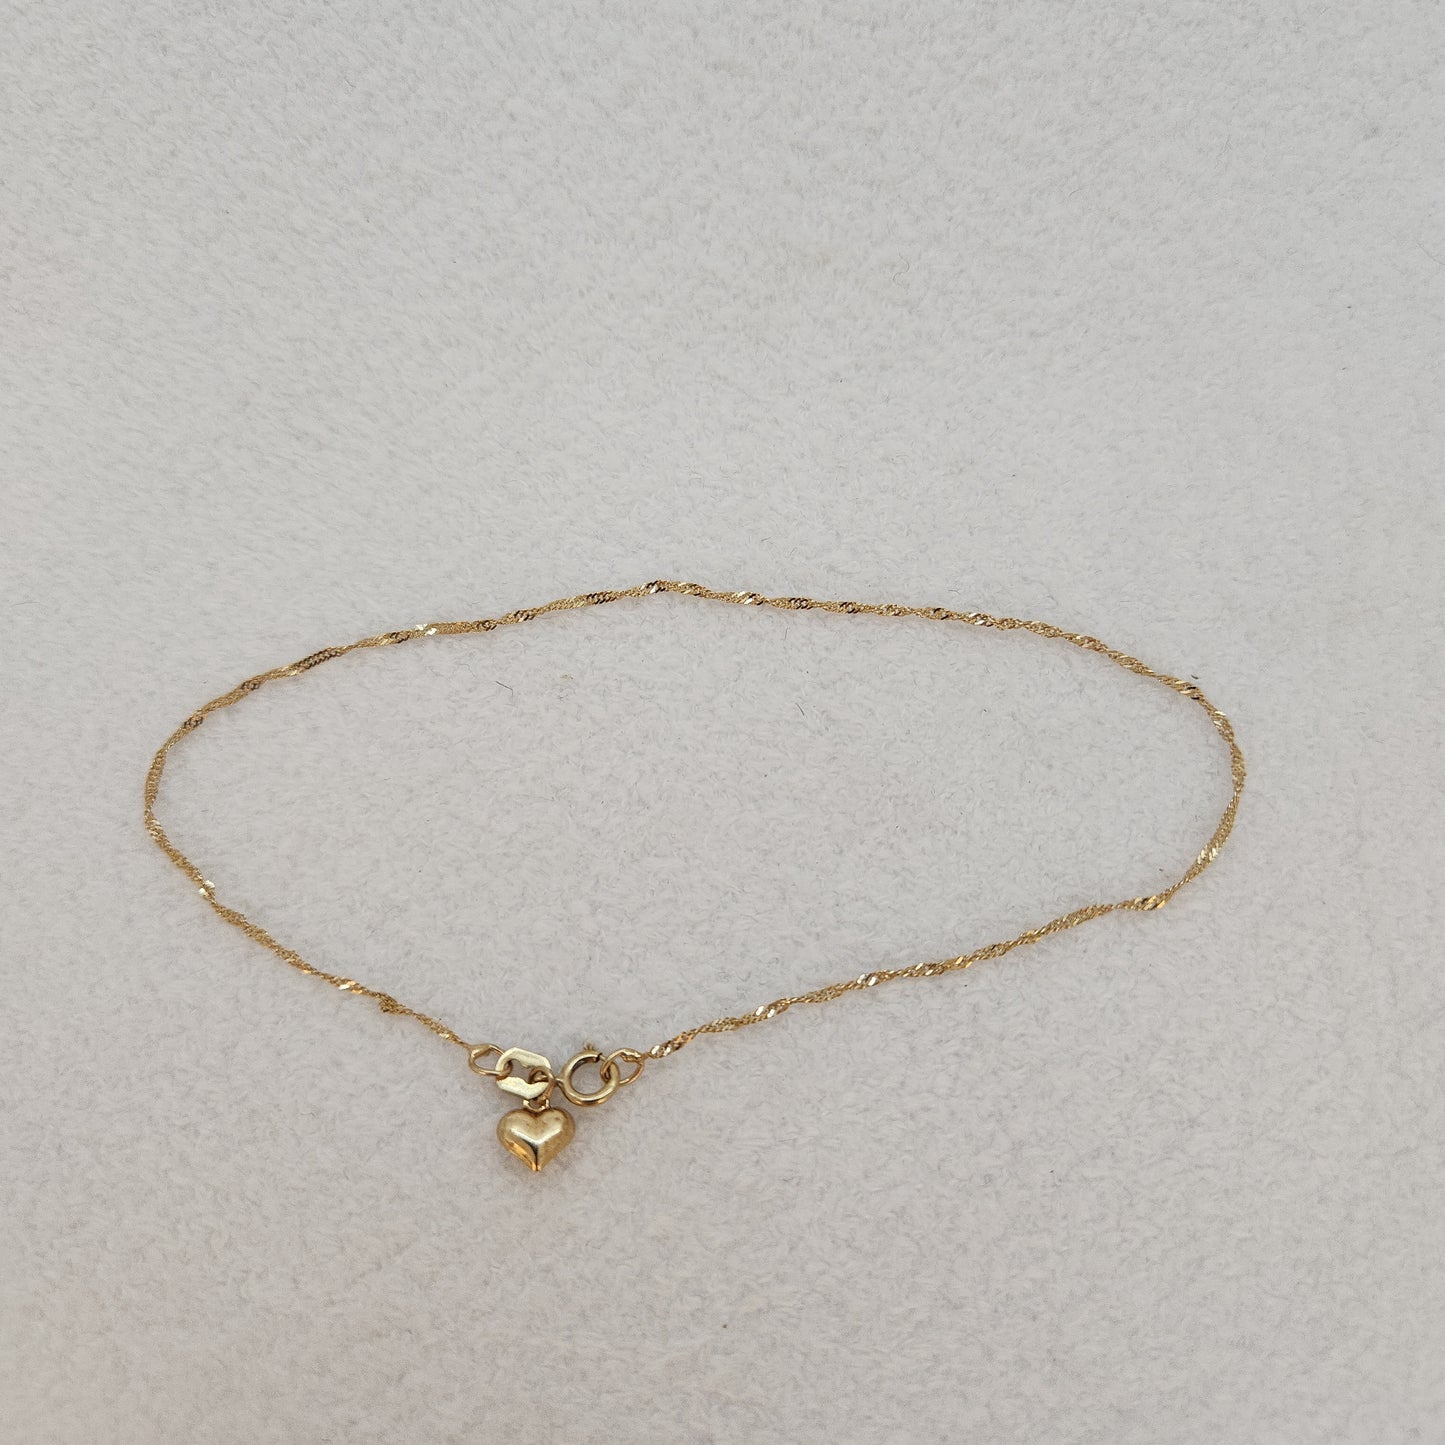 Anklet with Puffy Heart Charm